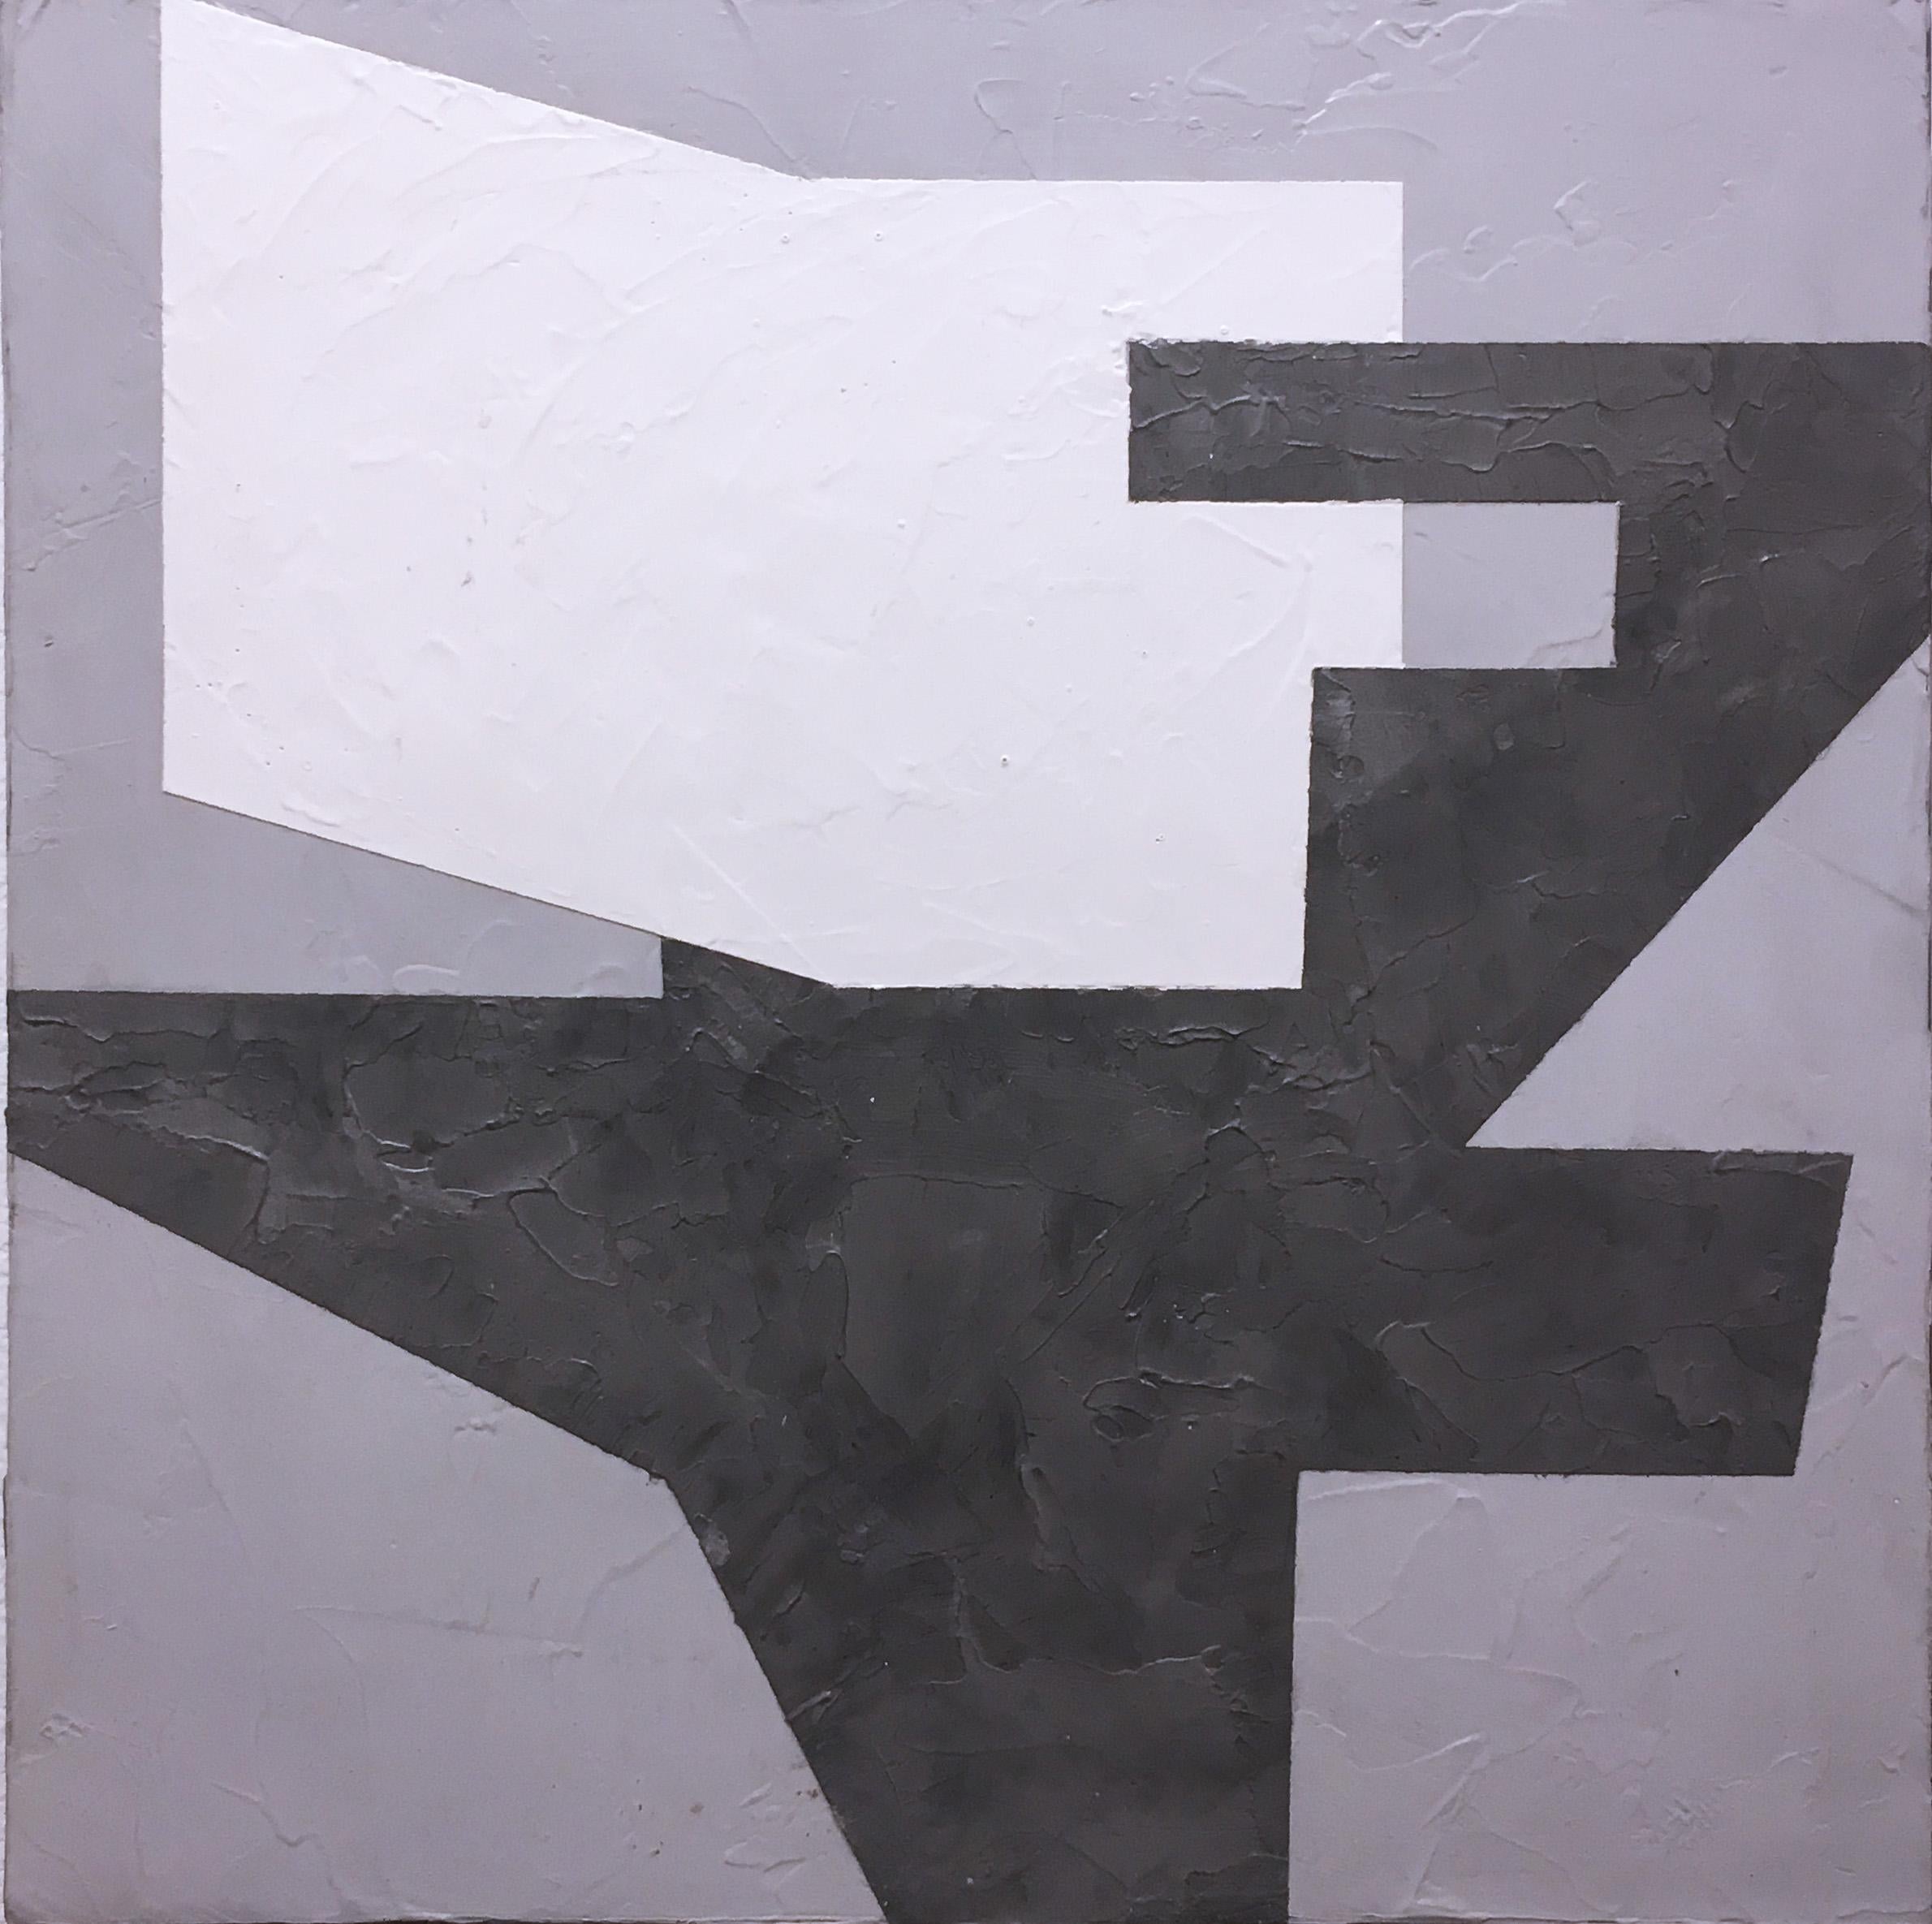 Balancing II, 2019, Abstract geometry, non-objective, plaster, black, white gray